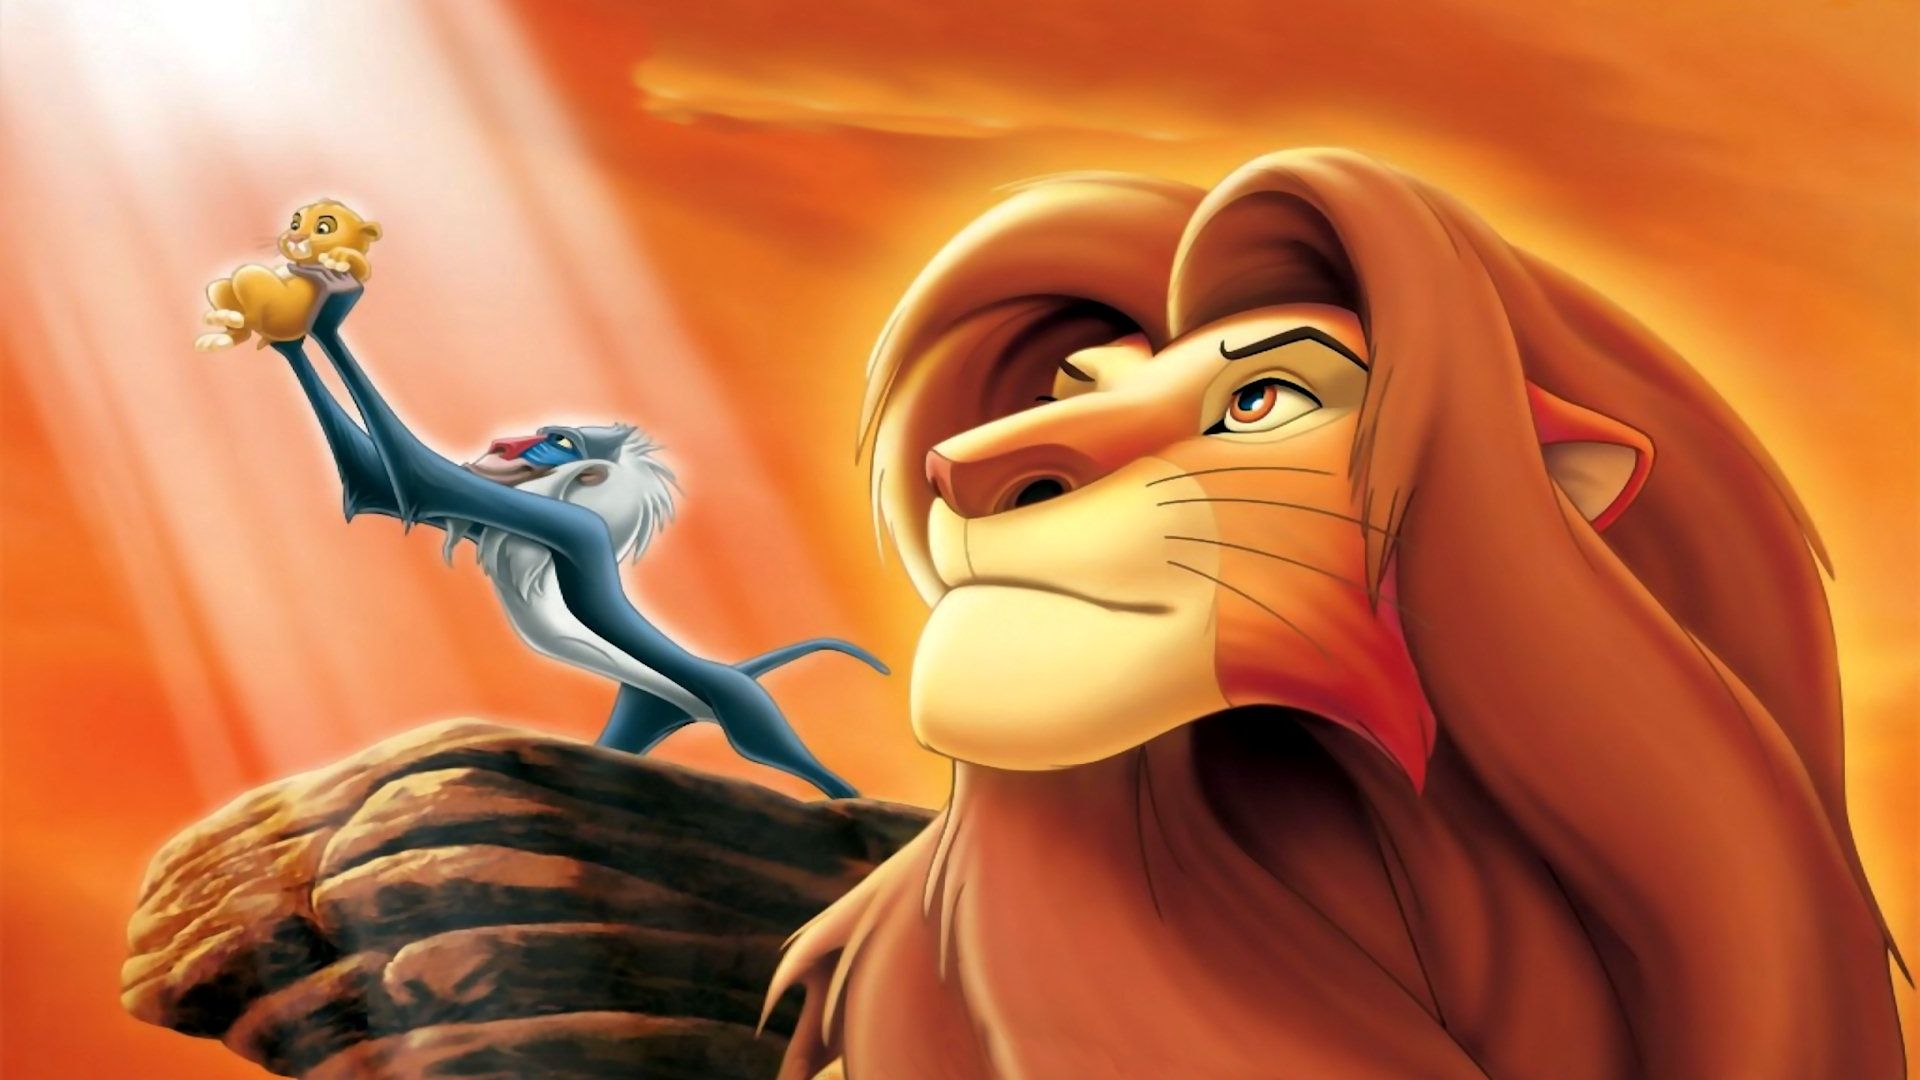 The Lion King Disney HD Wallpaper | Animation Wallpapers